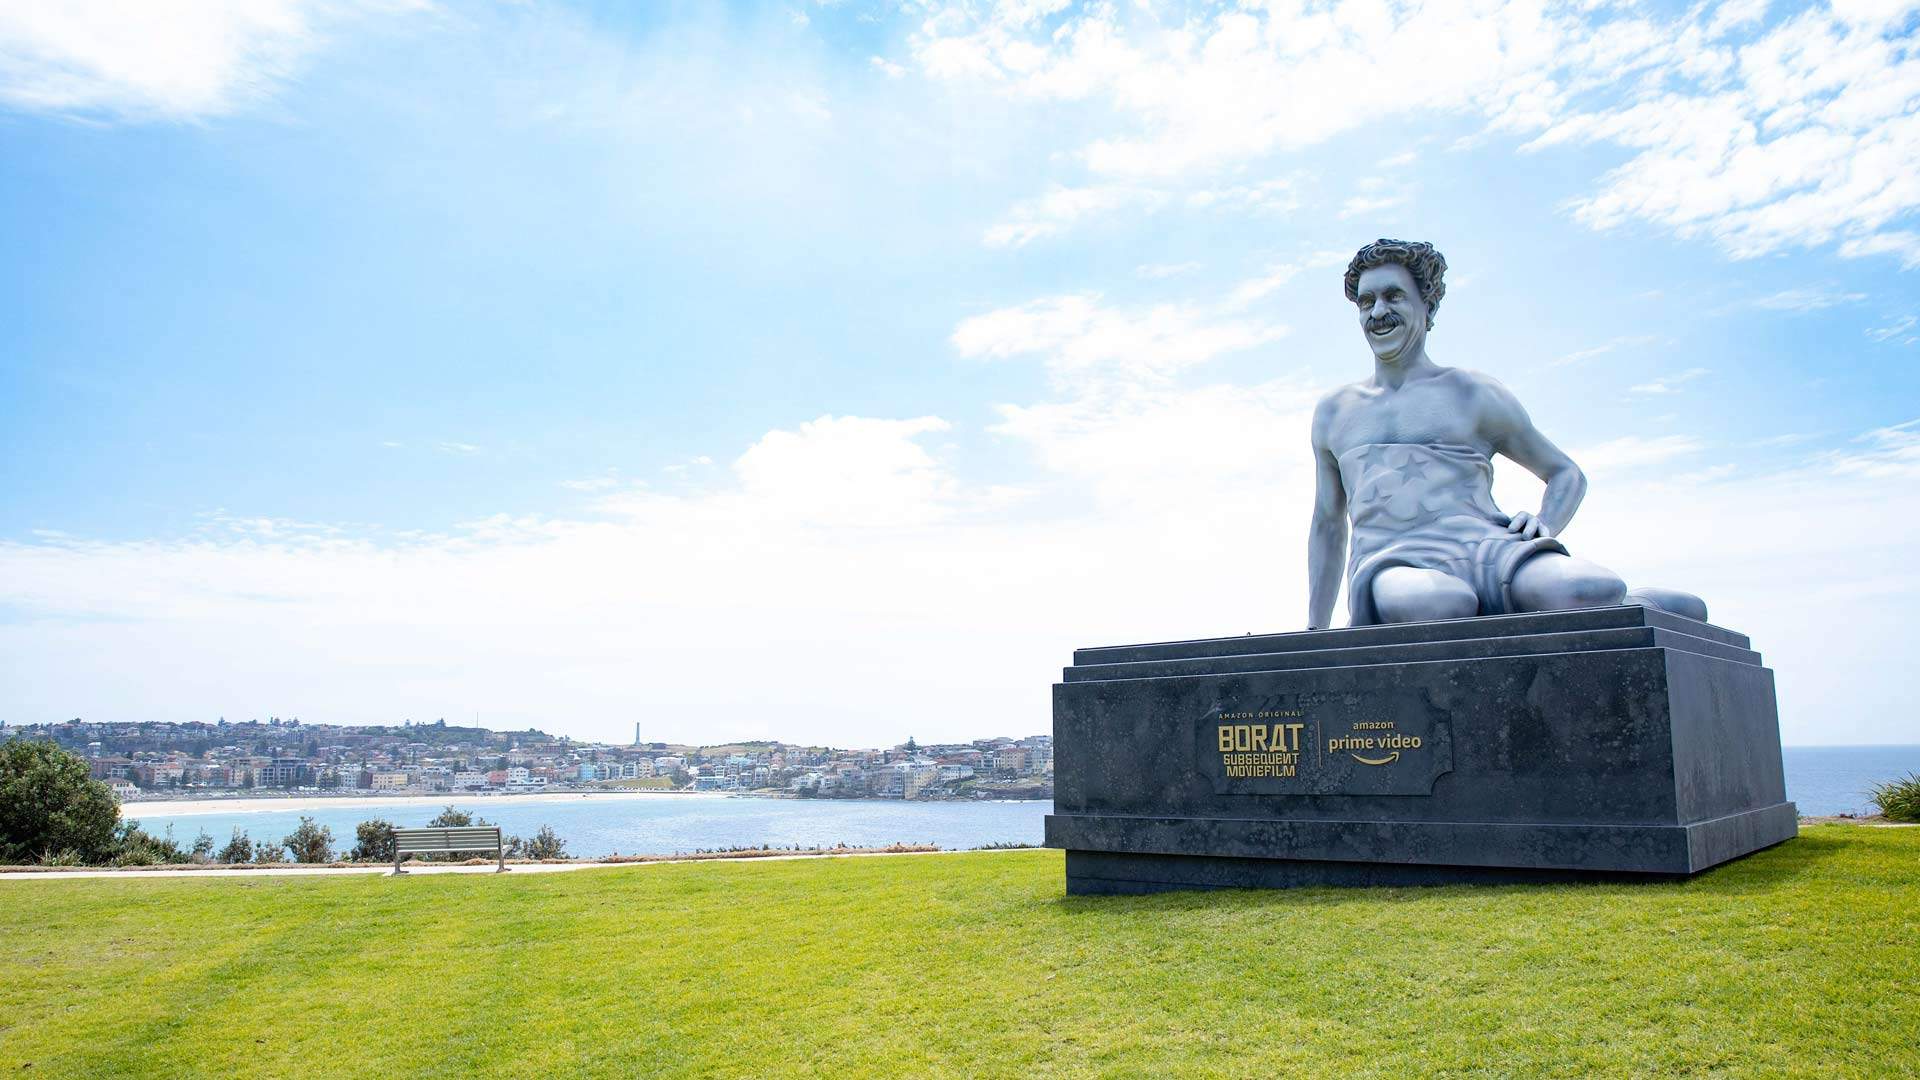 A Very Nice Statue of Borat Has Popped Up at Bondi Beach for 24 Hours Playground. Concrete Playground Sydney